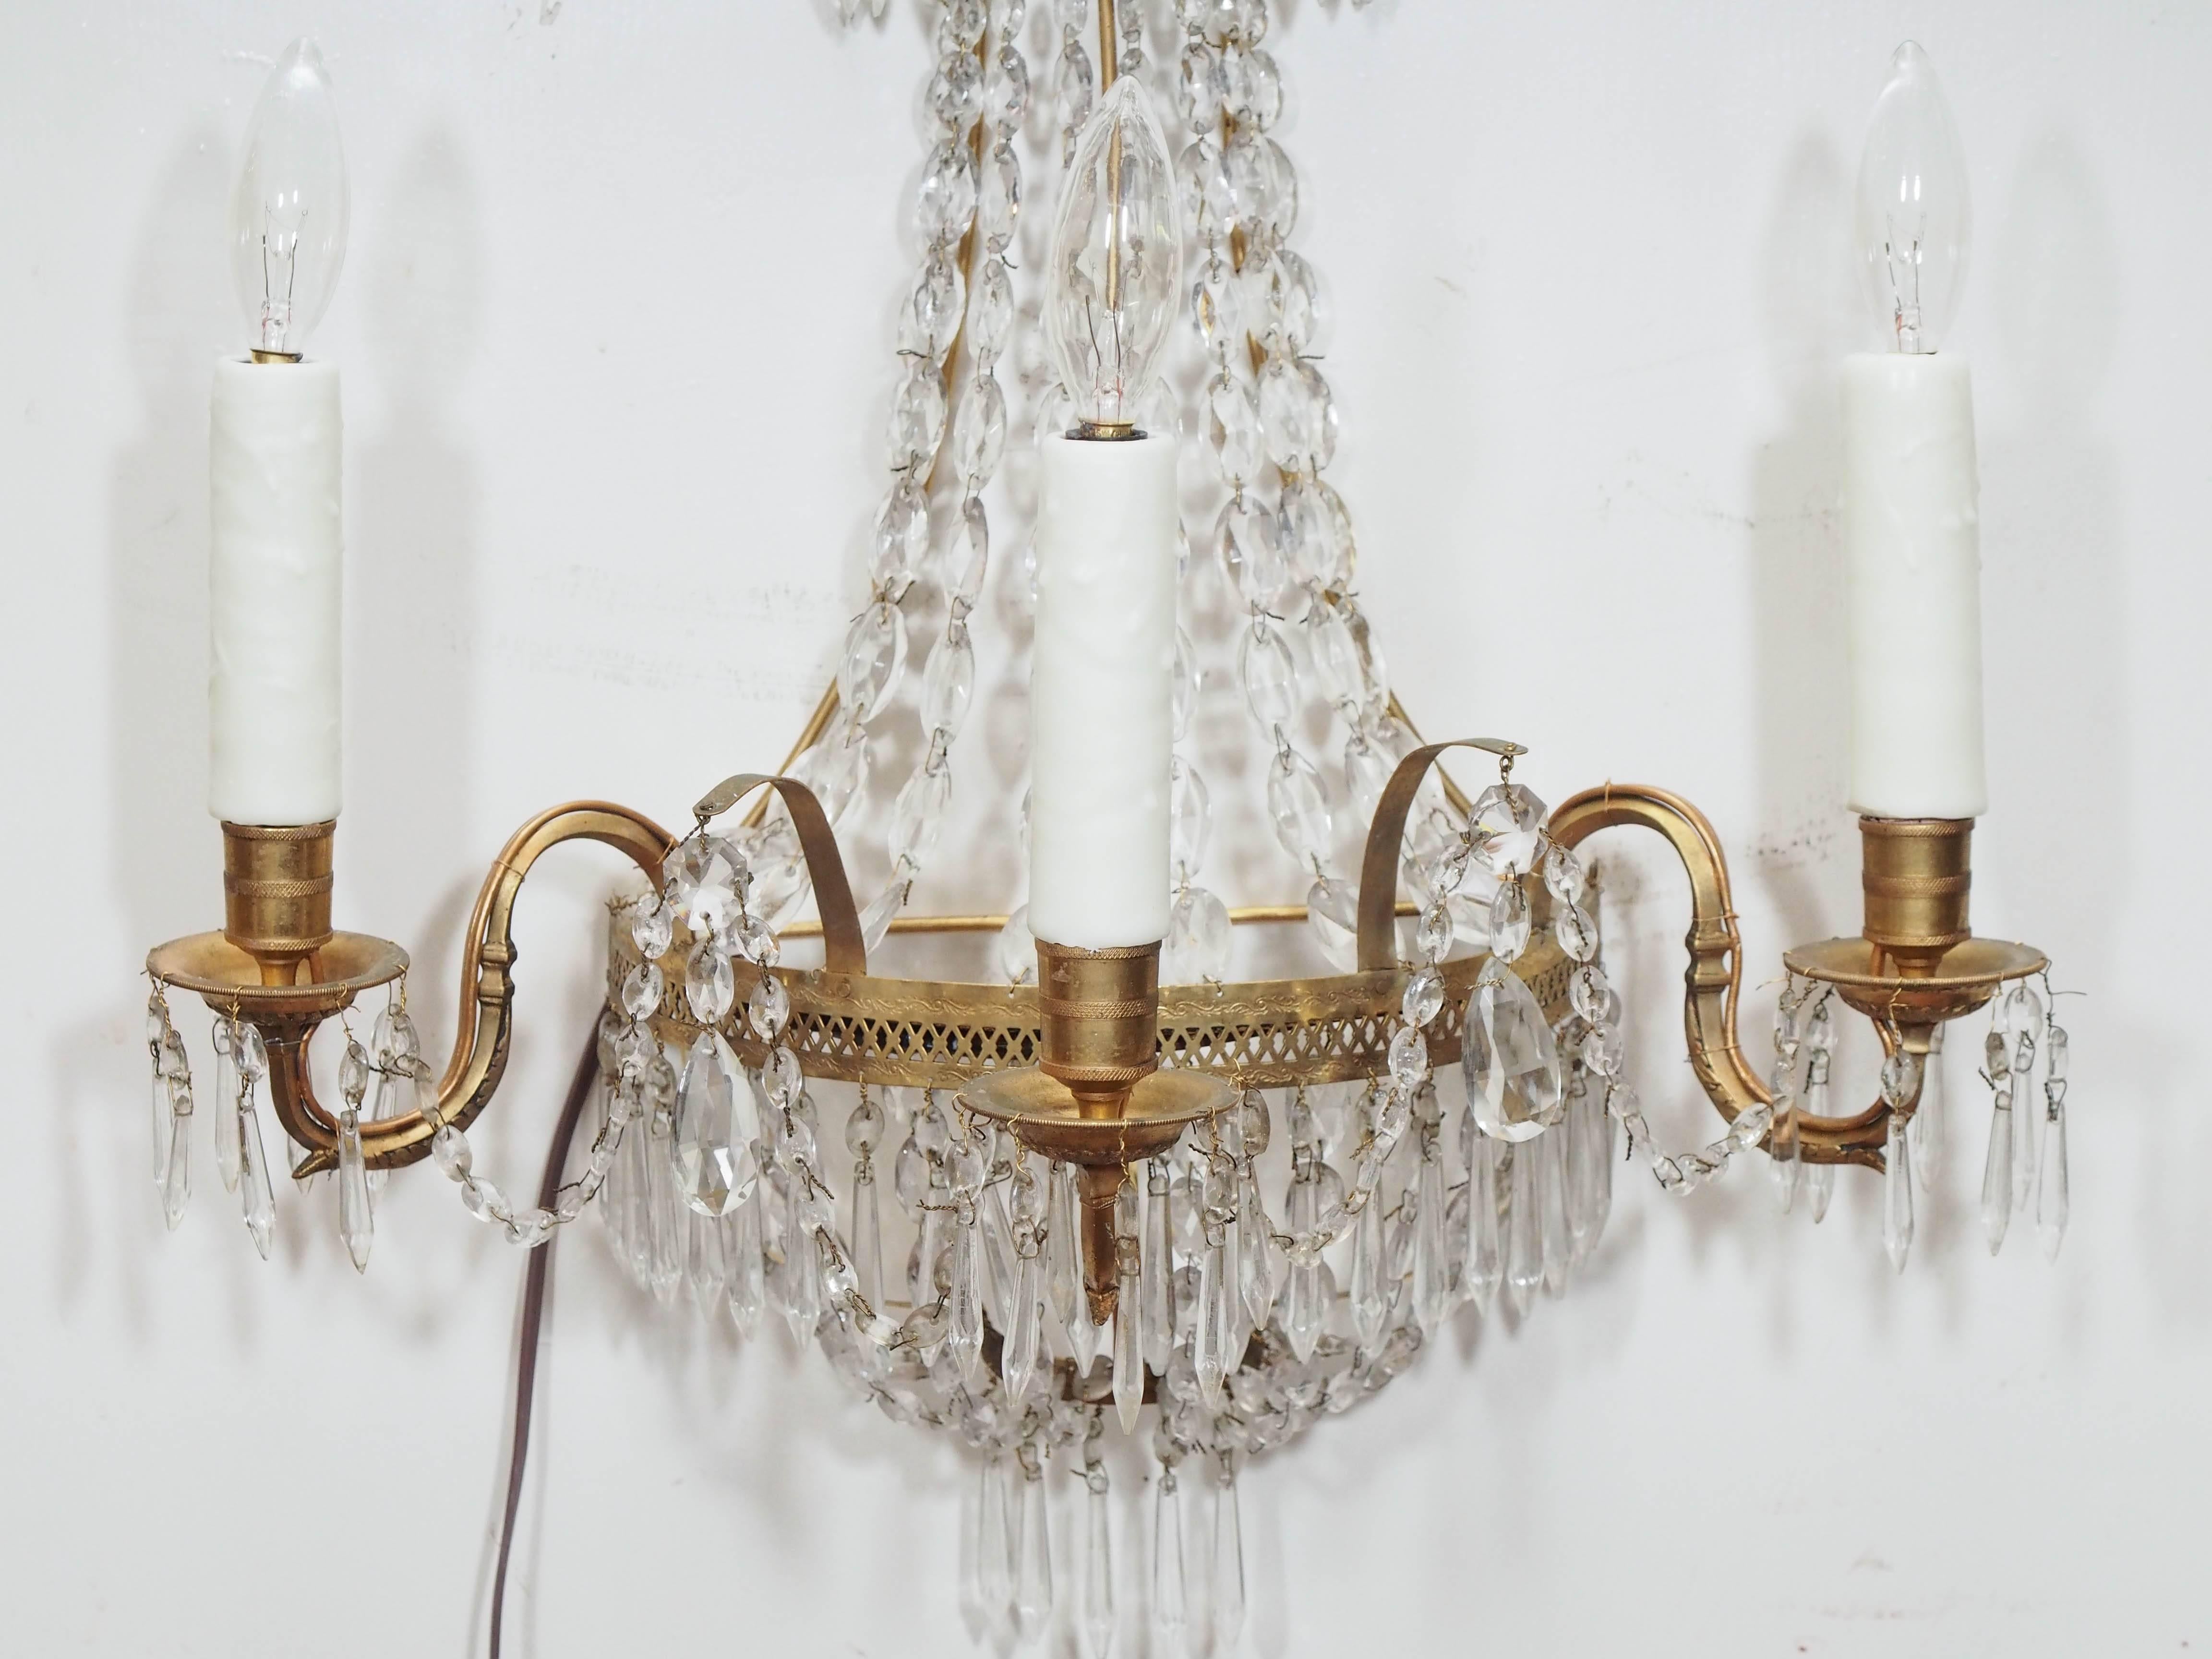 19th Century Pair of Italian Empire Style Brass and Crystal Wall Sconces